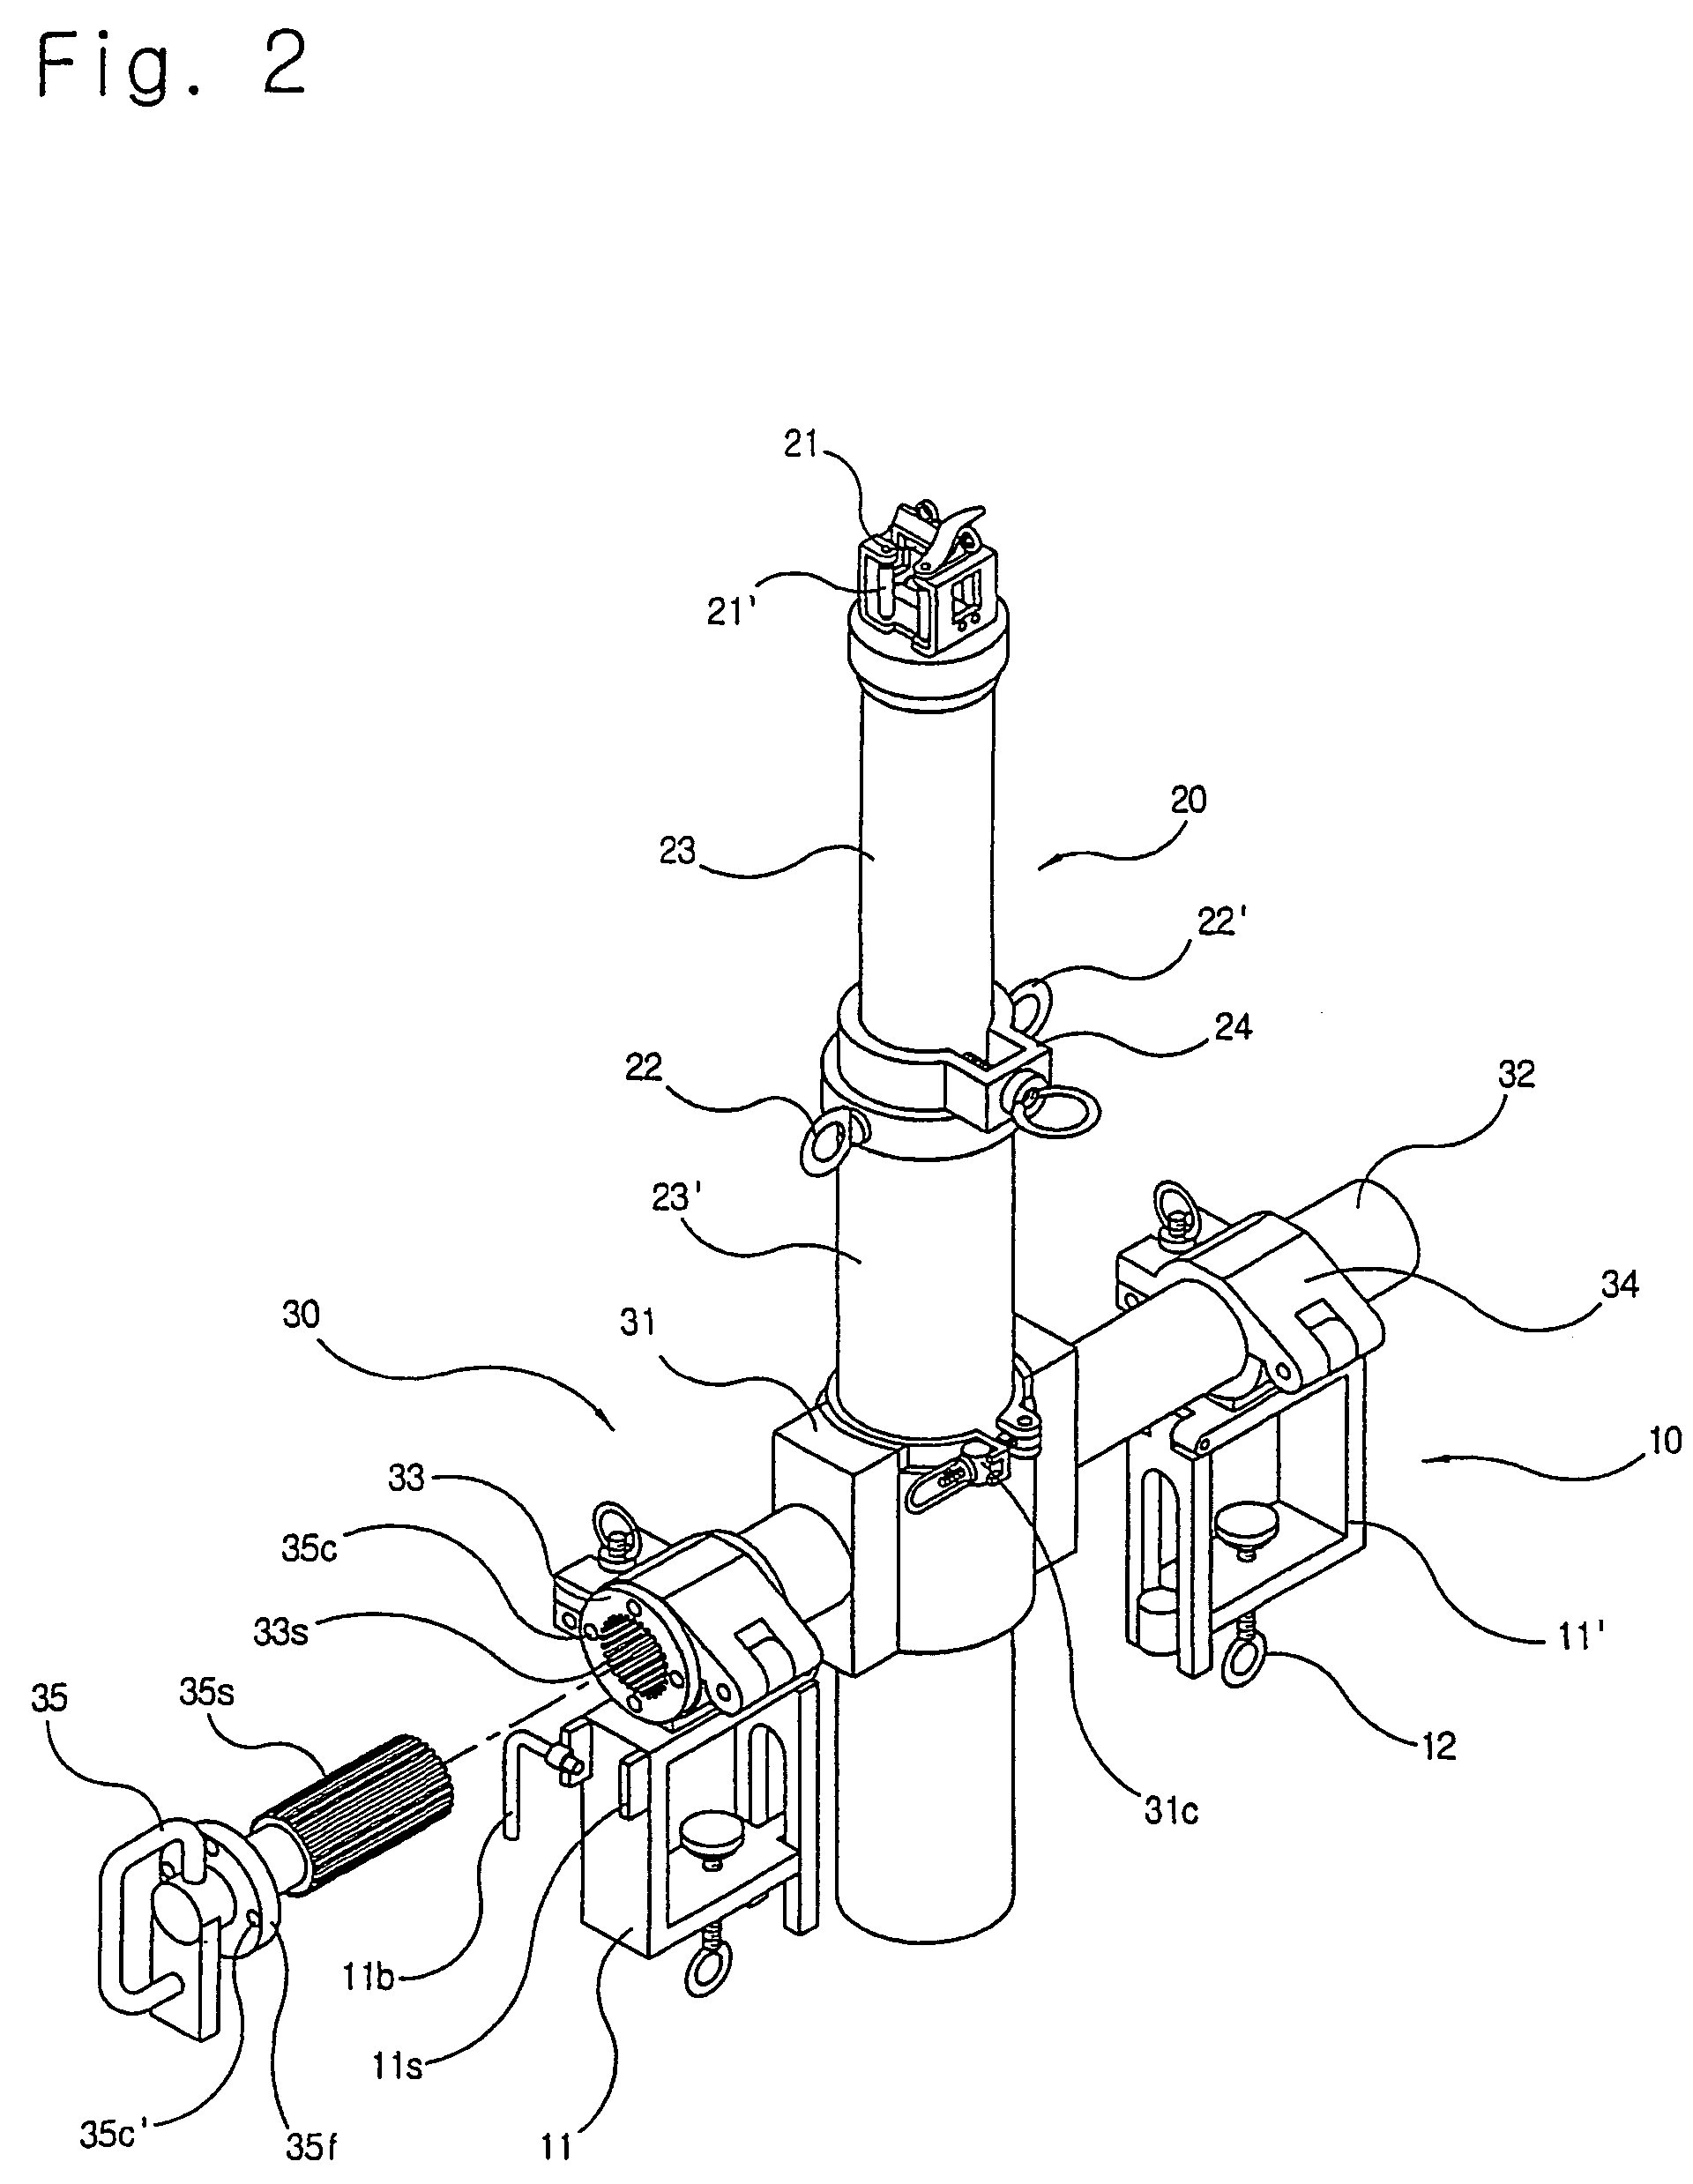 Electric wire changing device for wire replacing works on electric poles and power distributing method without cutting off power supply